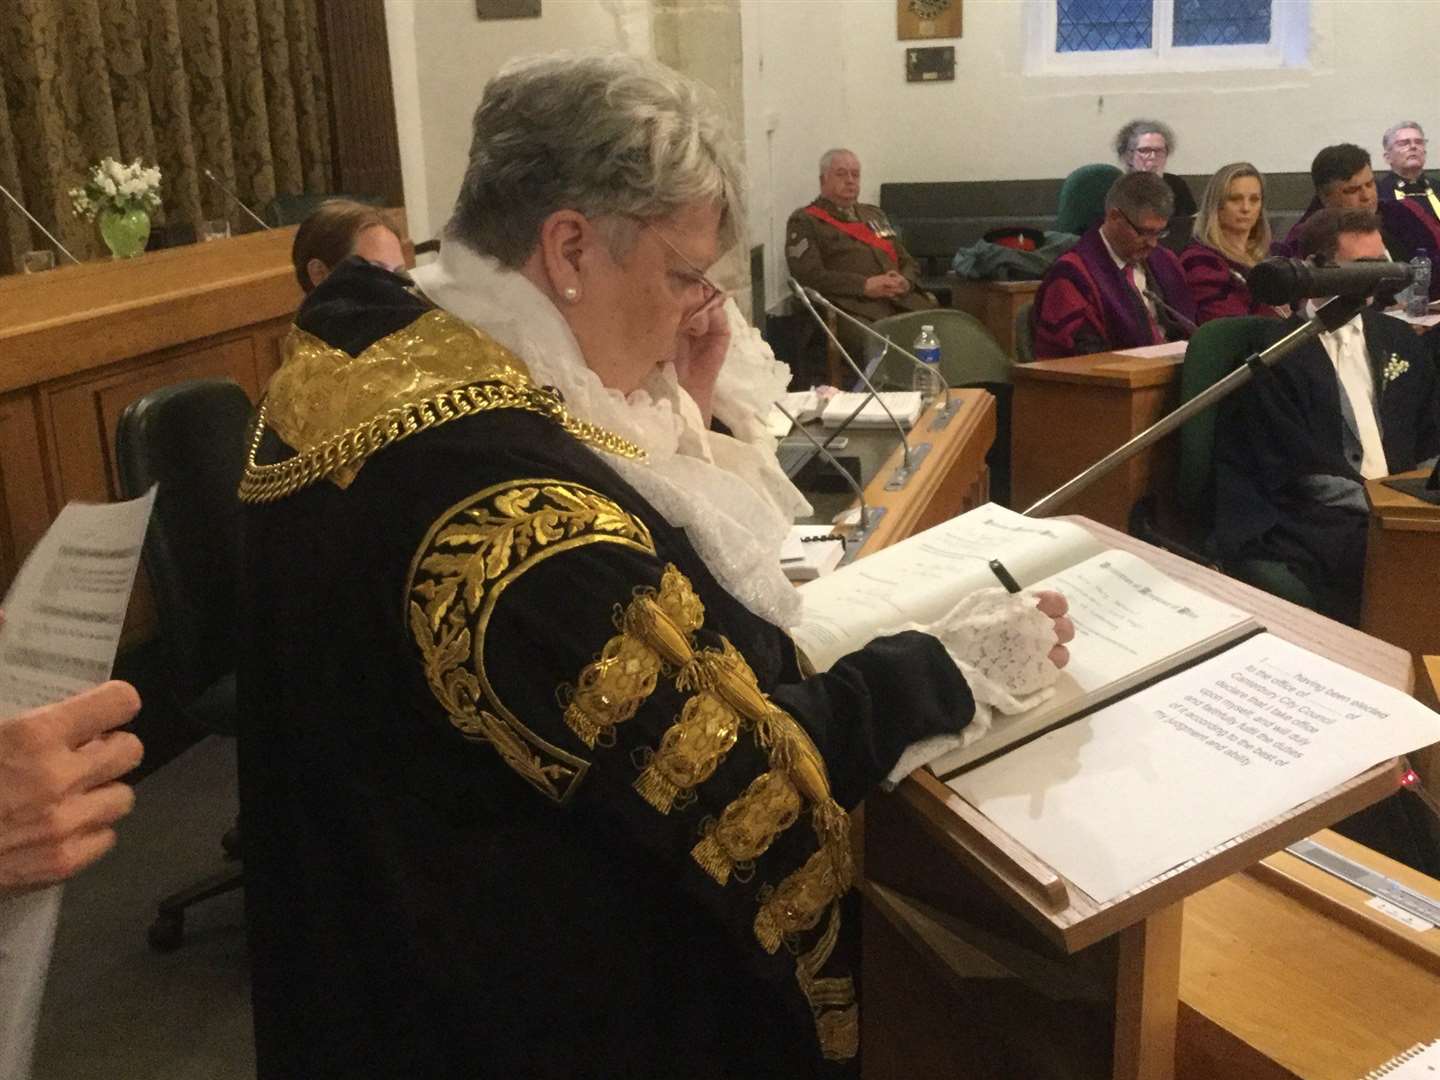 Herne and Broomfield councillor Anne Dekker was voted Canterbury's Lord Mayor following the secret ballot